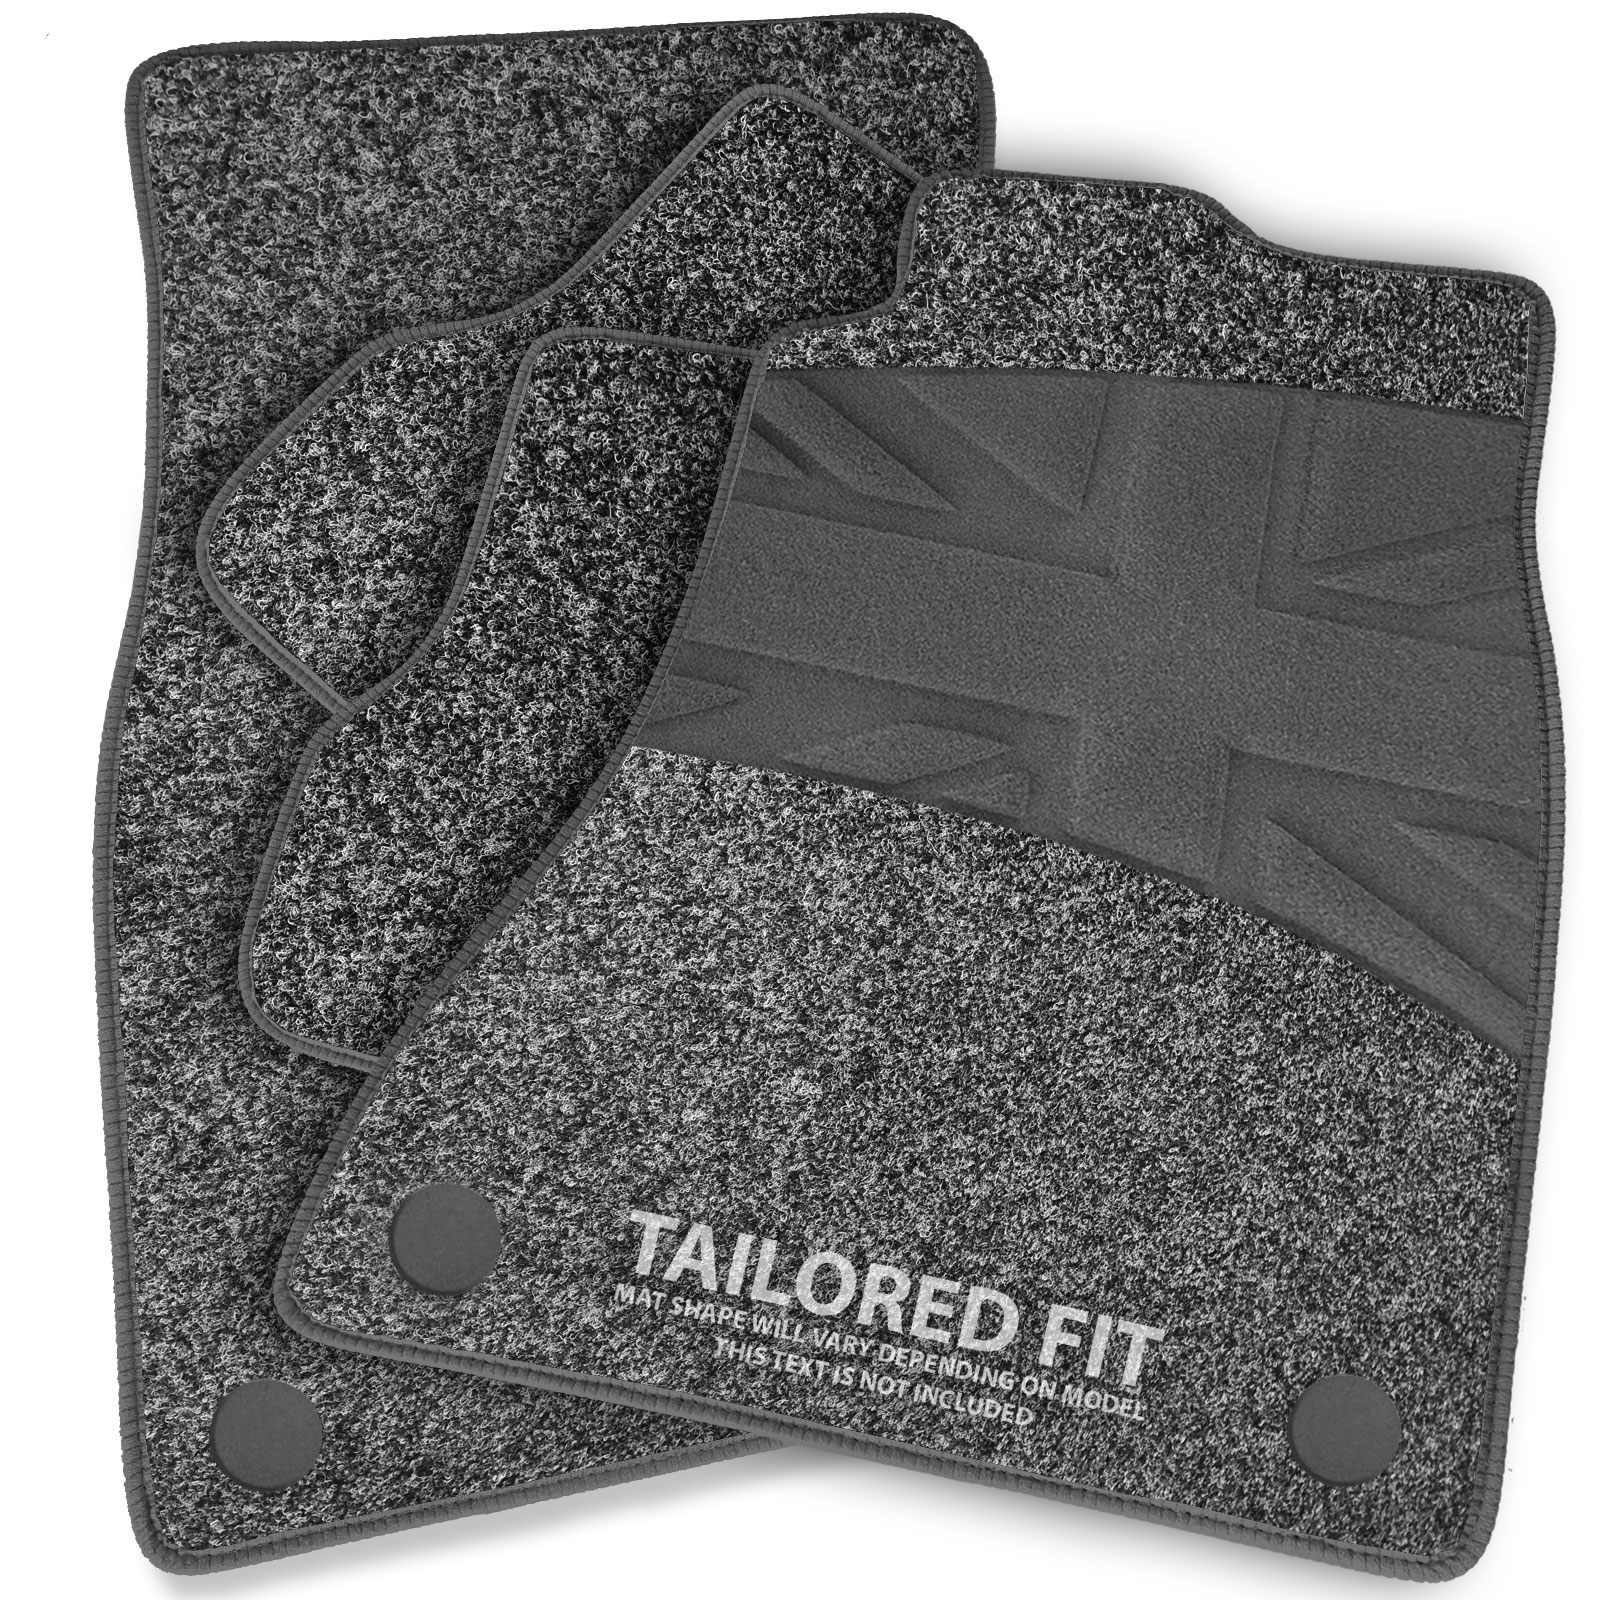 New Carpet Car Floor Mats 4 Pc Set for Cars Trucks SUVS with Heel Pad  -Front and Rear Mats Universal Classic Matching Heel Pad (Black)